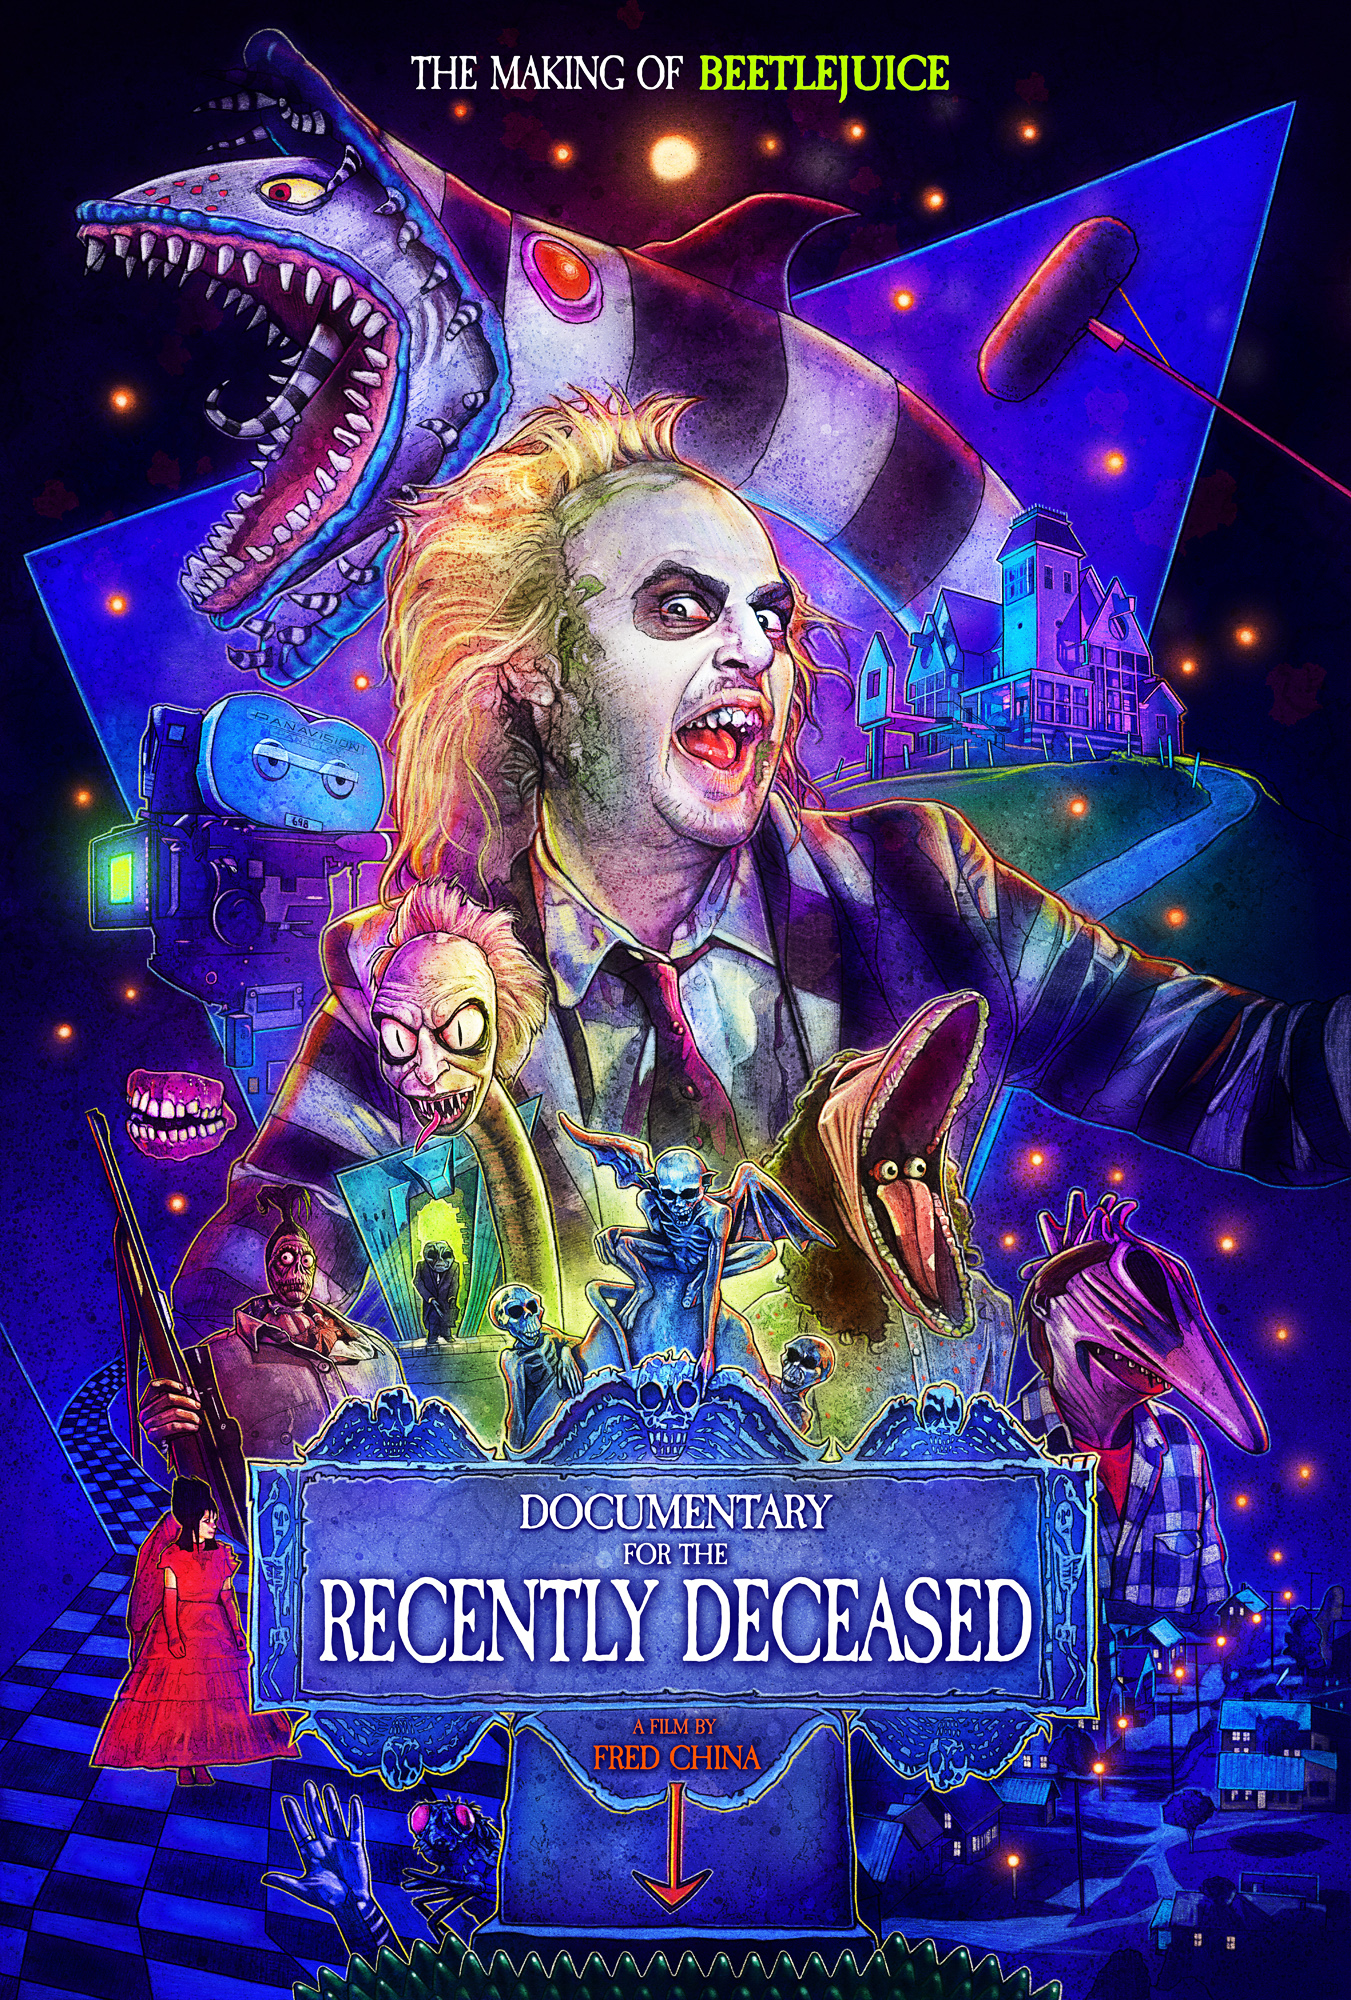 Beetlejuice - The Making of Documentary Poster by Kyle Lambert